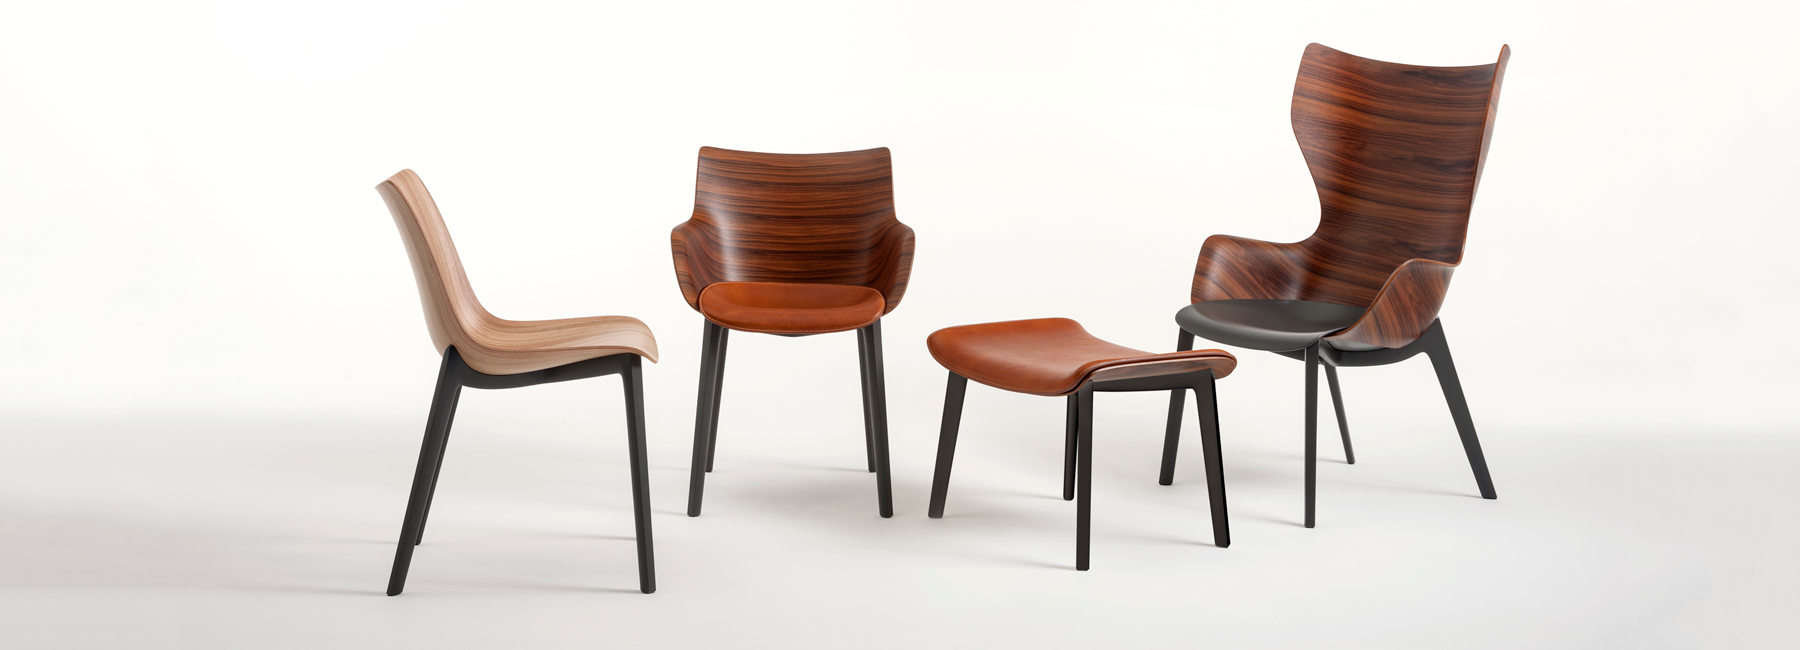 philippe starck proves wood is just as good for plastic fantastic kartell